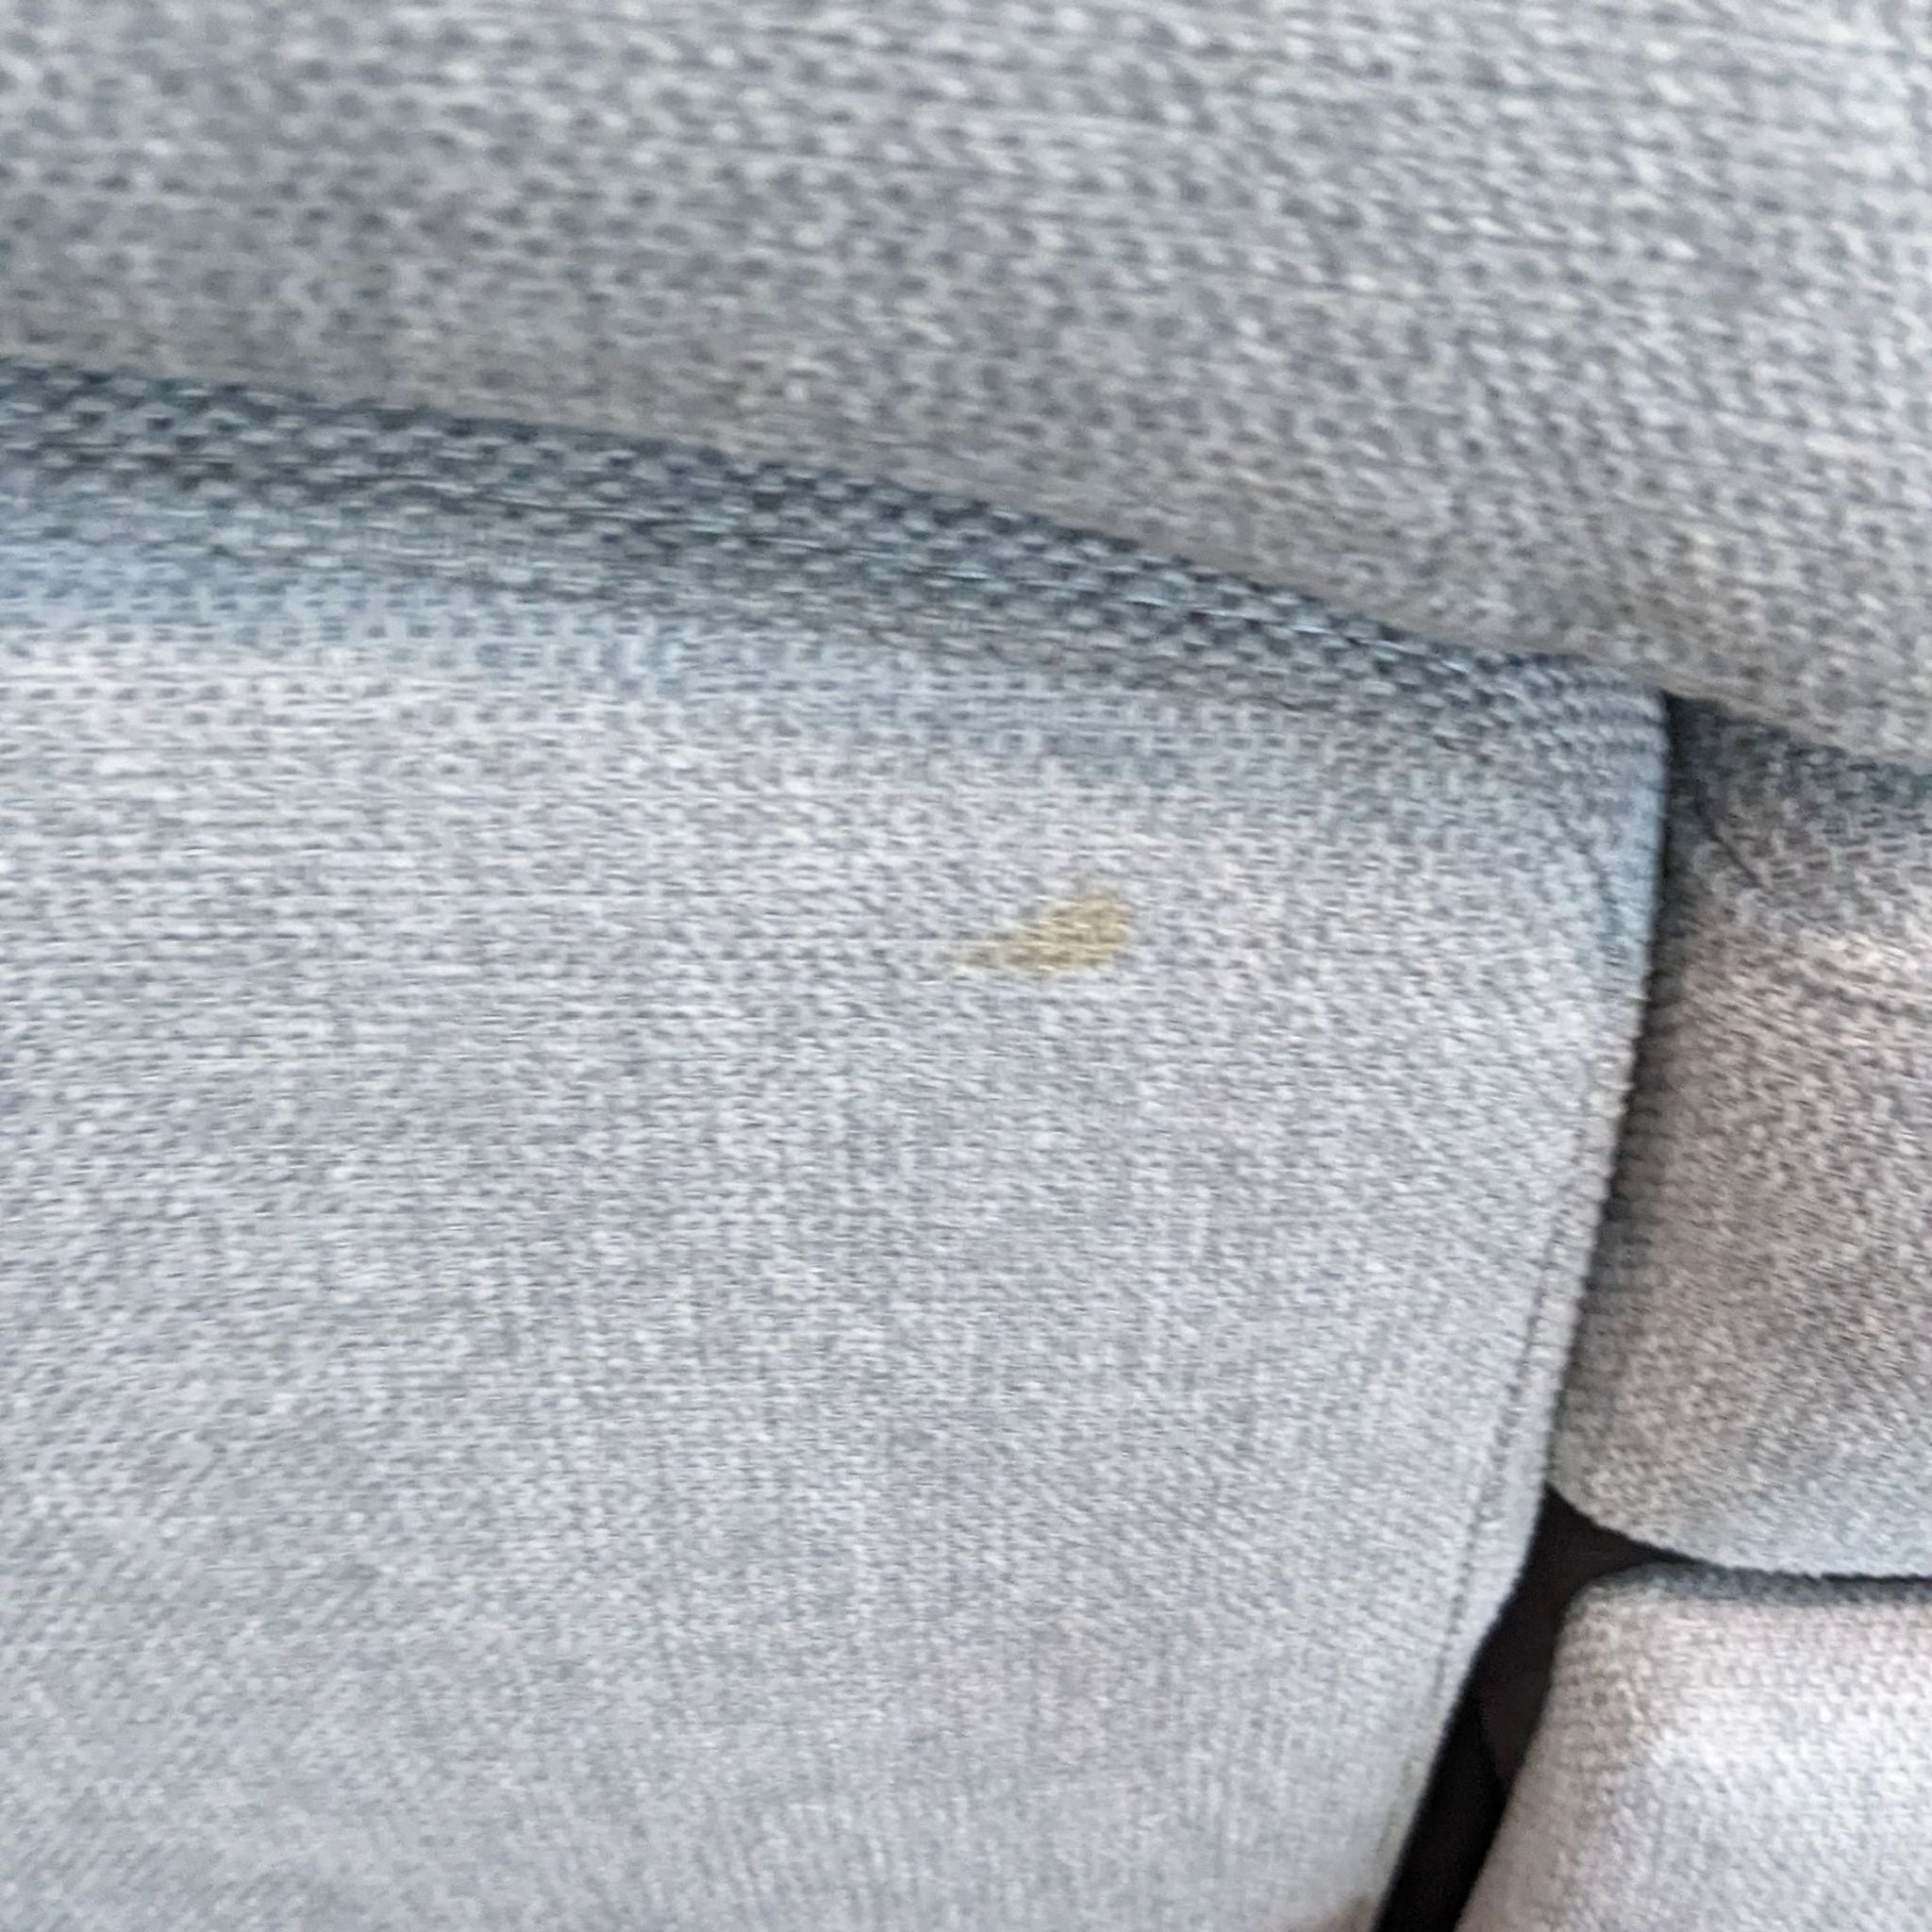 3. Close-up of a light stain on the gray fabric of a Reperch modular sectional, detailing the texture and quality of the material.